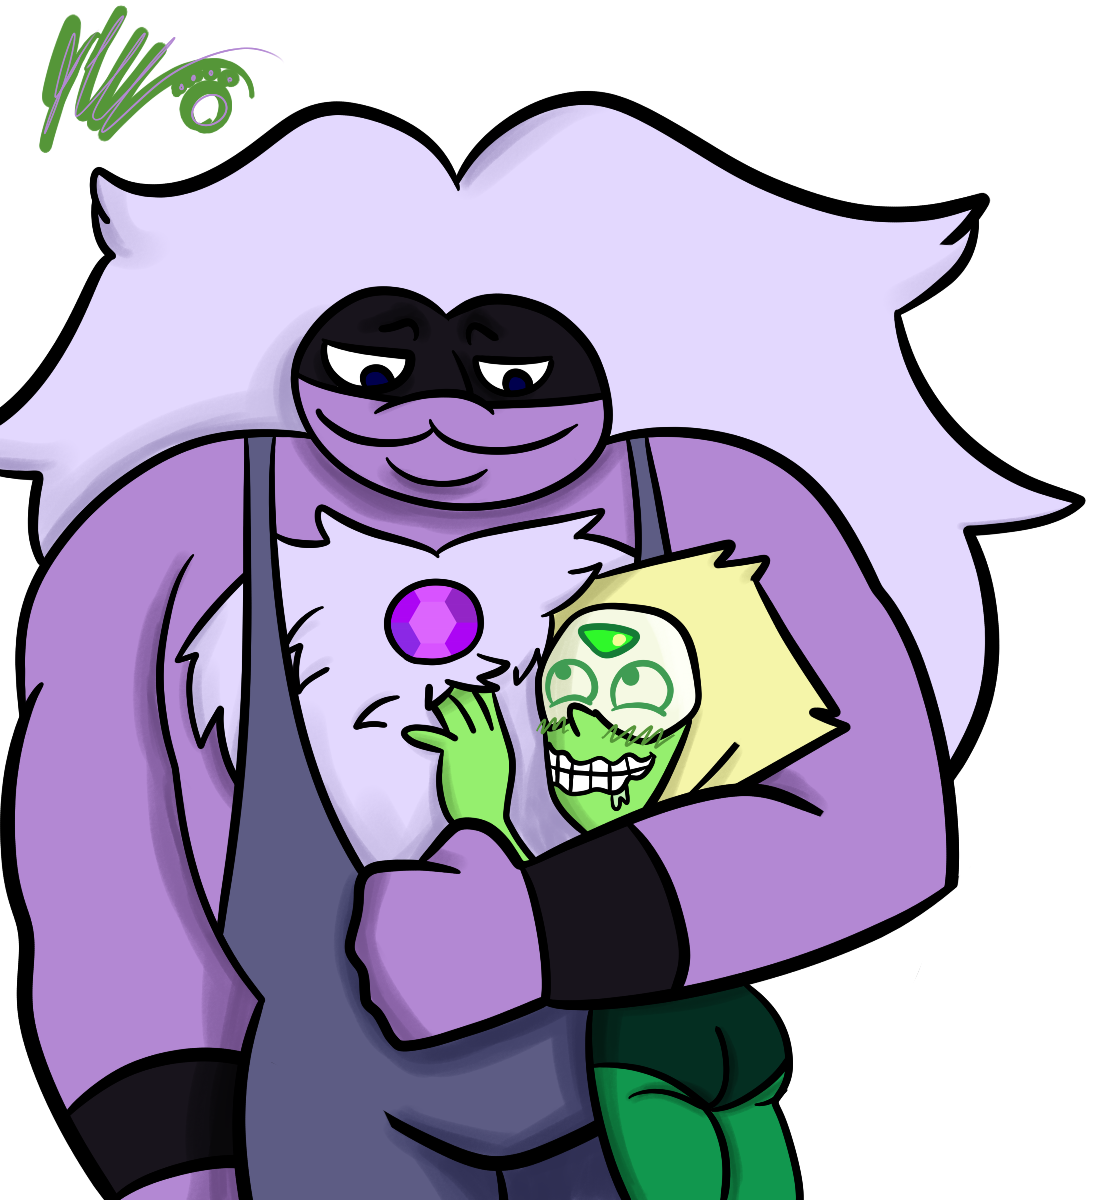 Peridot is such a size queen.